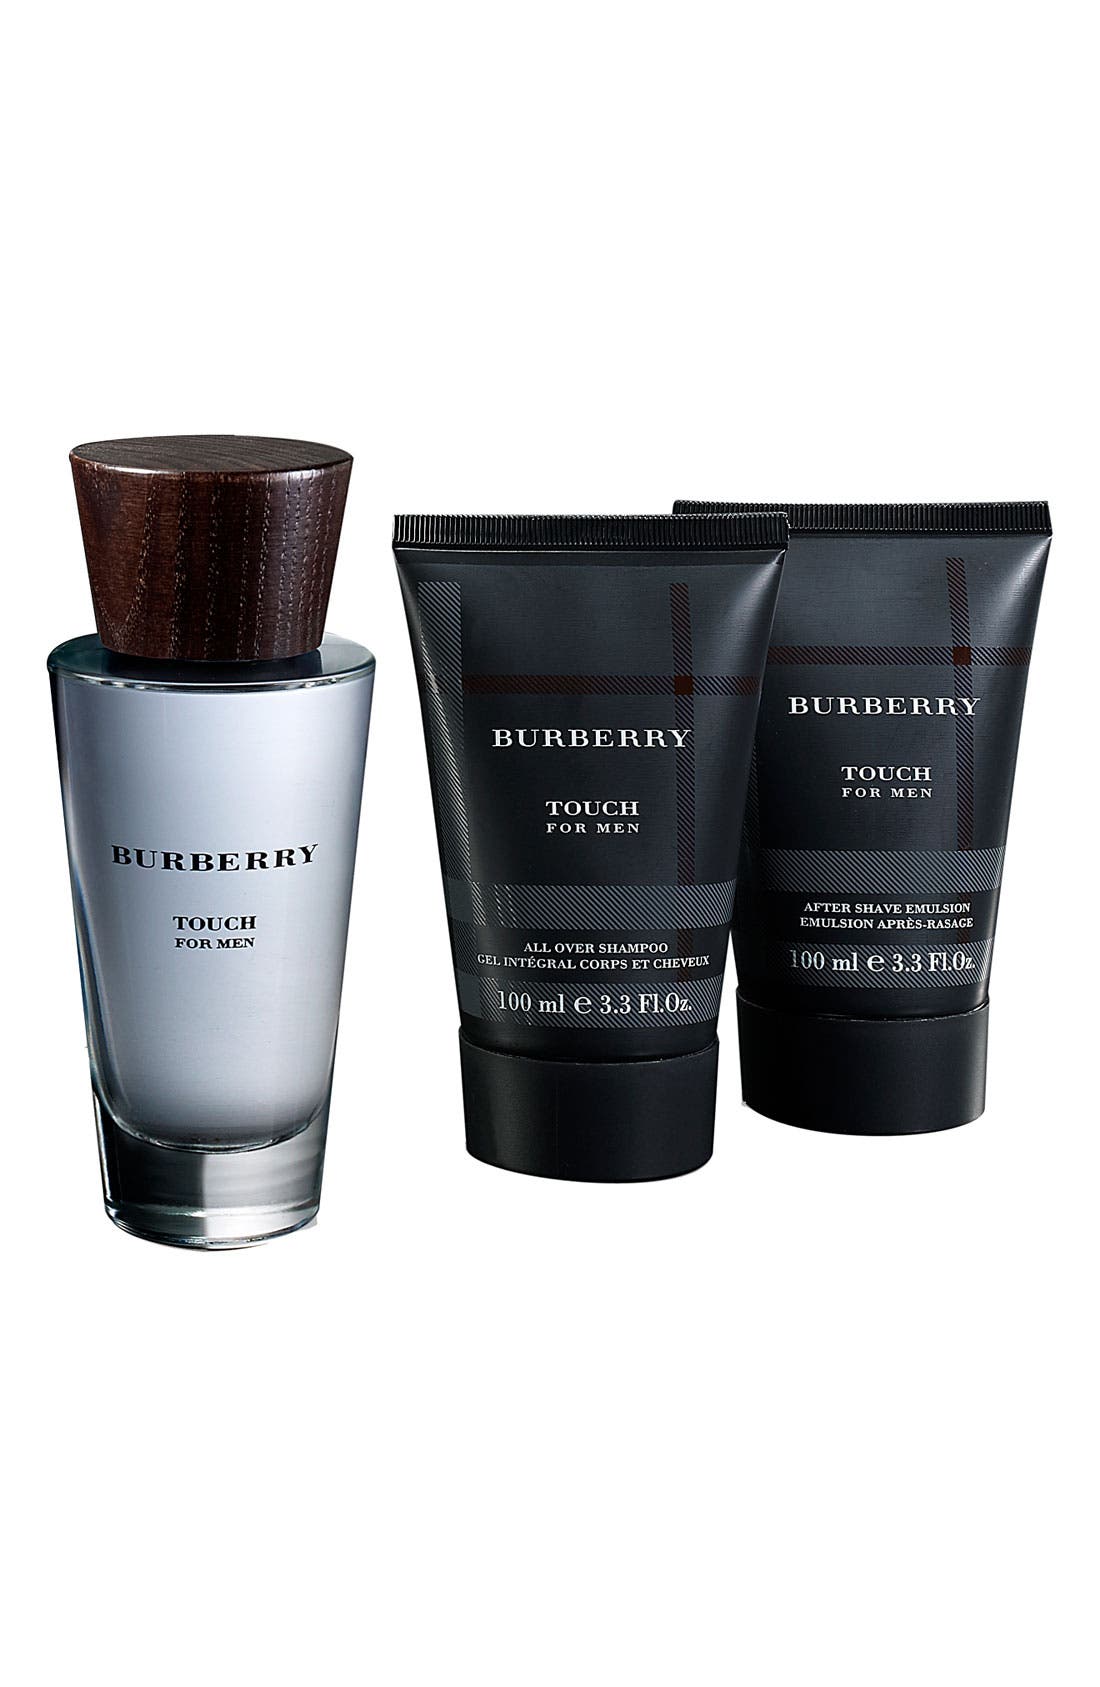 Burberry Touch for Men Gift Set ($115 